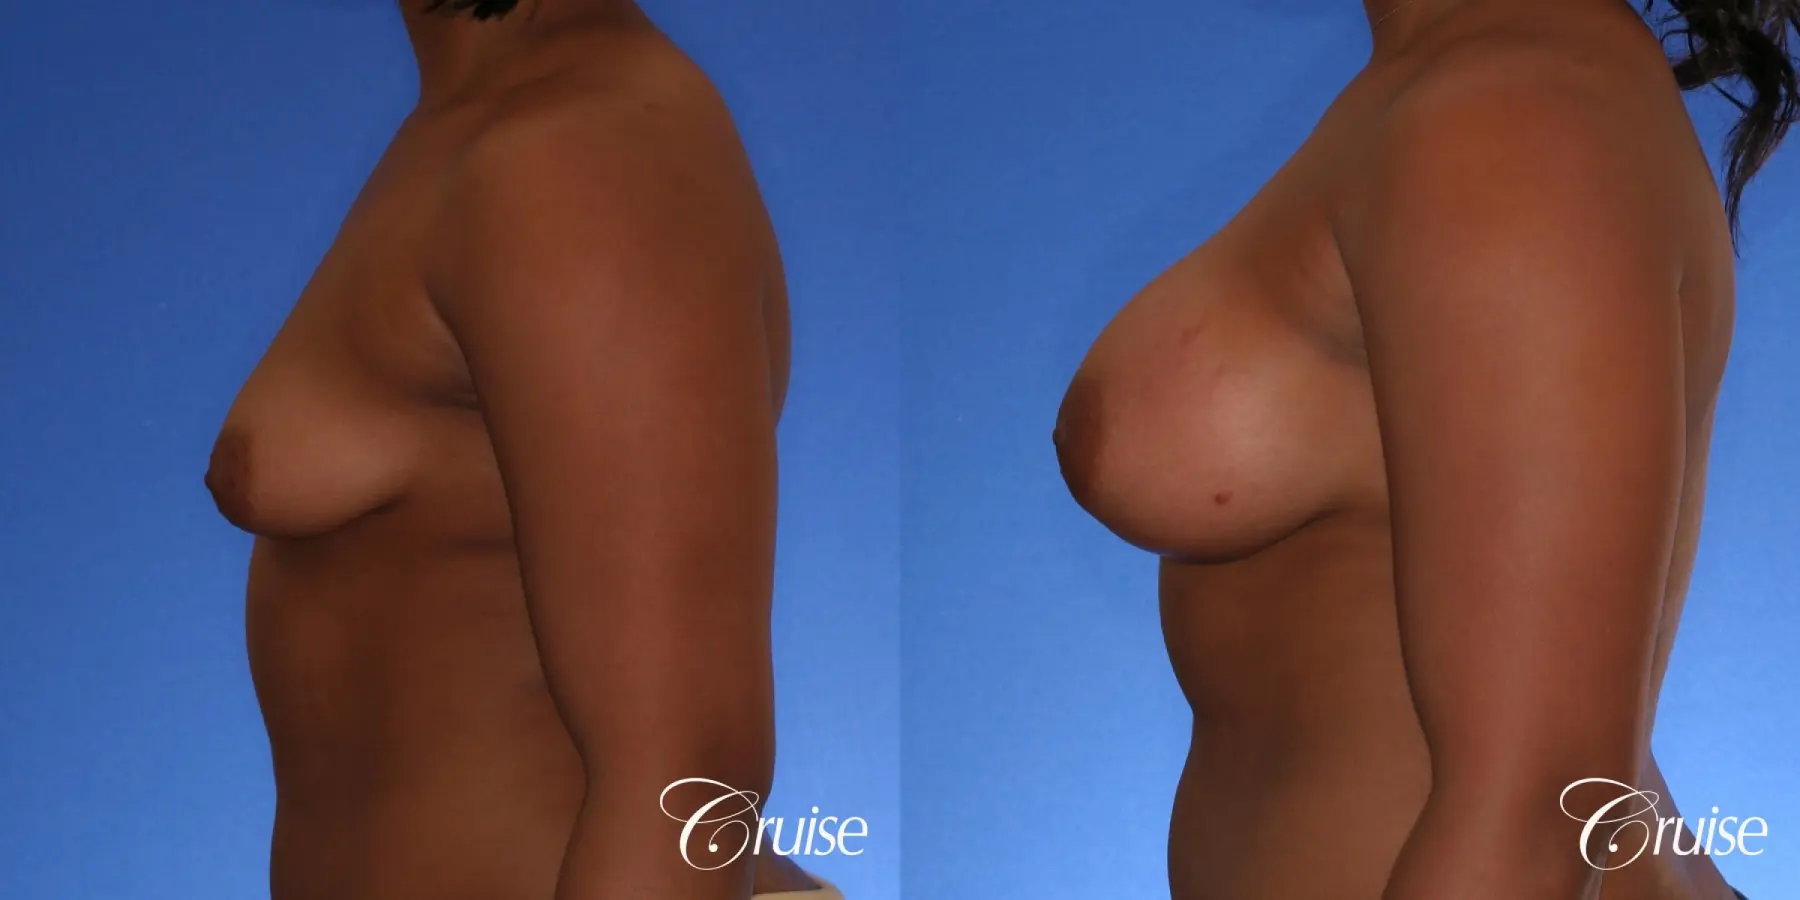 Breast Augmentation - Before and After 2